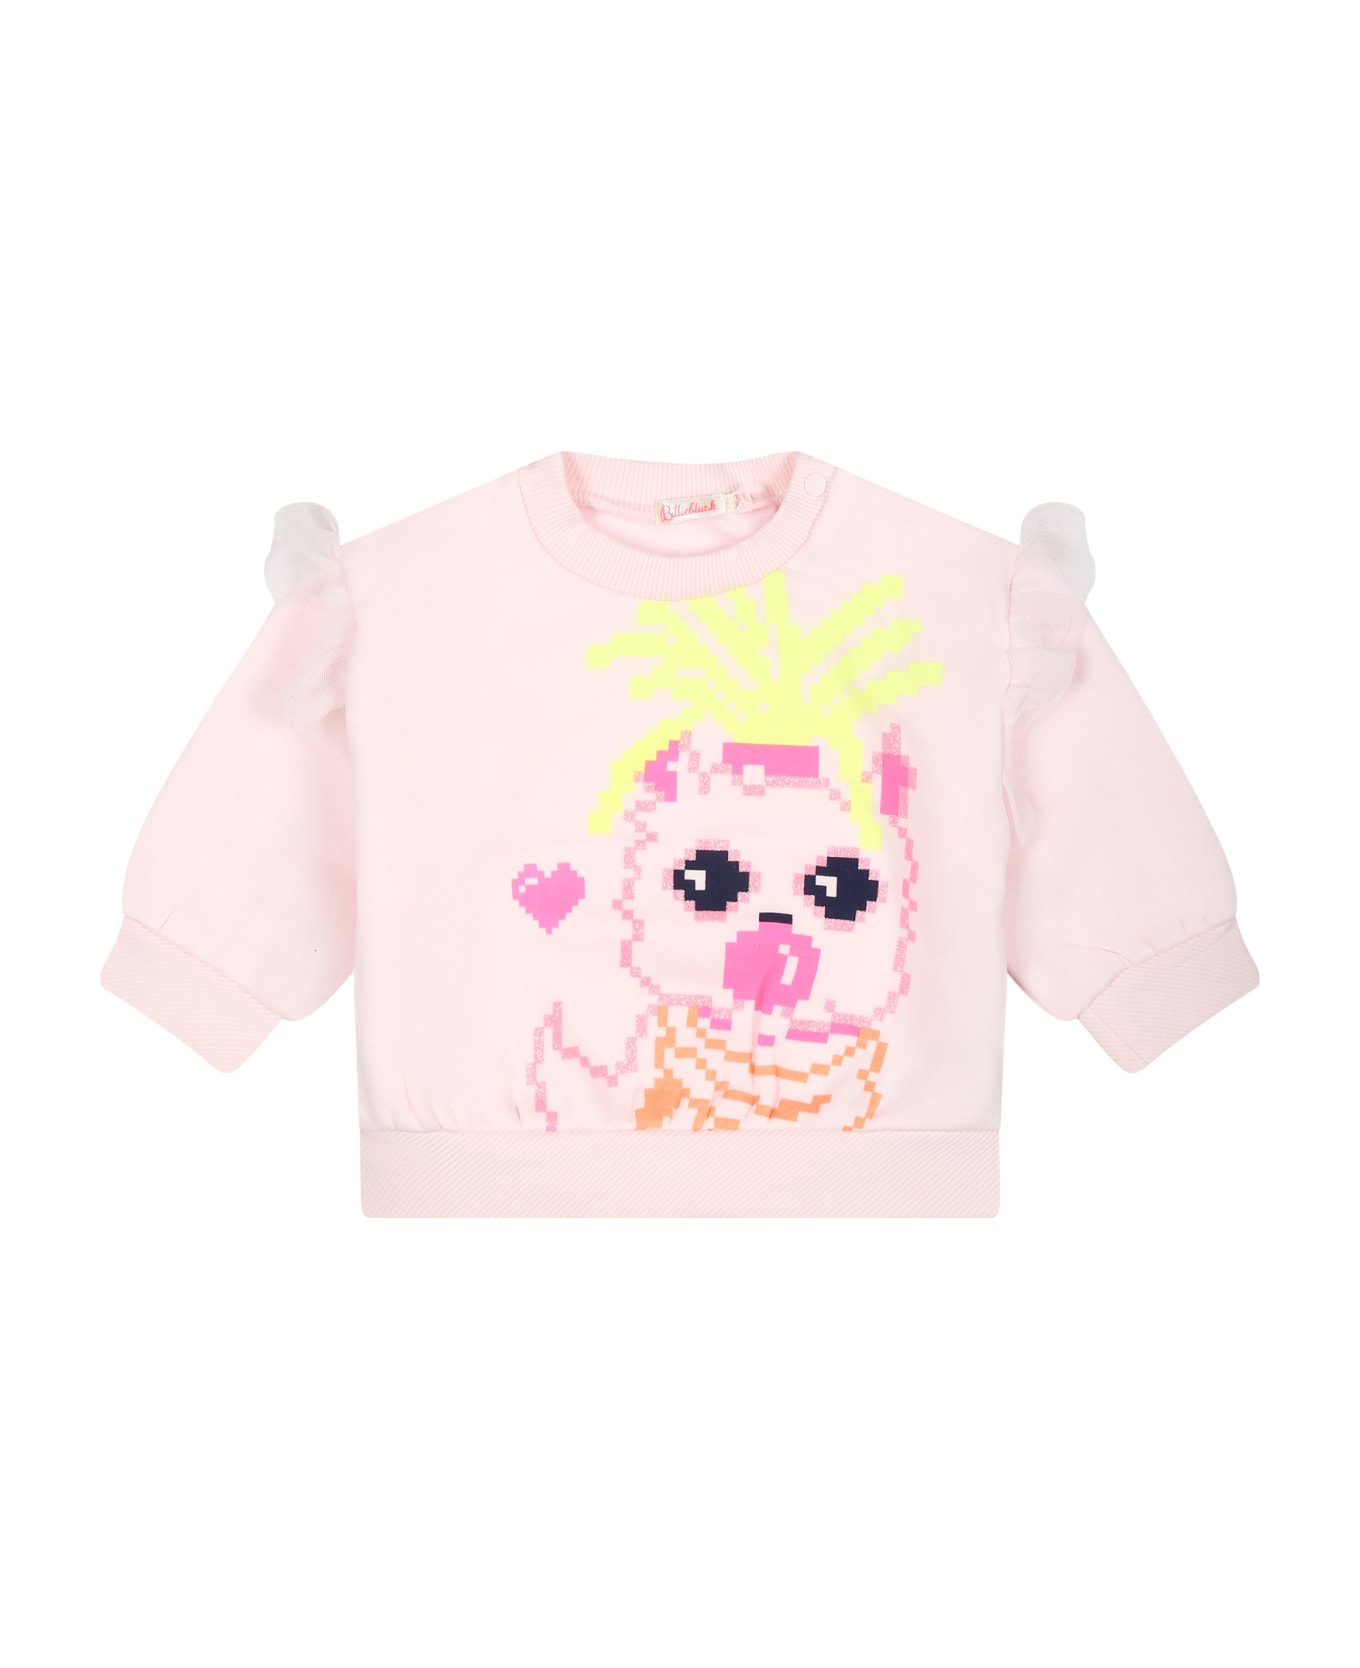 Billieblush Pink Sweatshirt For Baby Girls With Multicolor Print - Pink